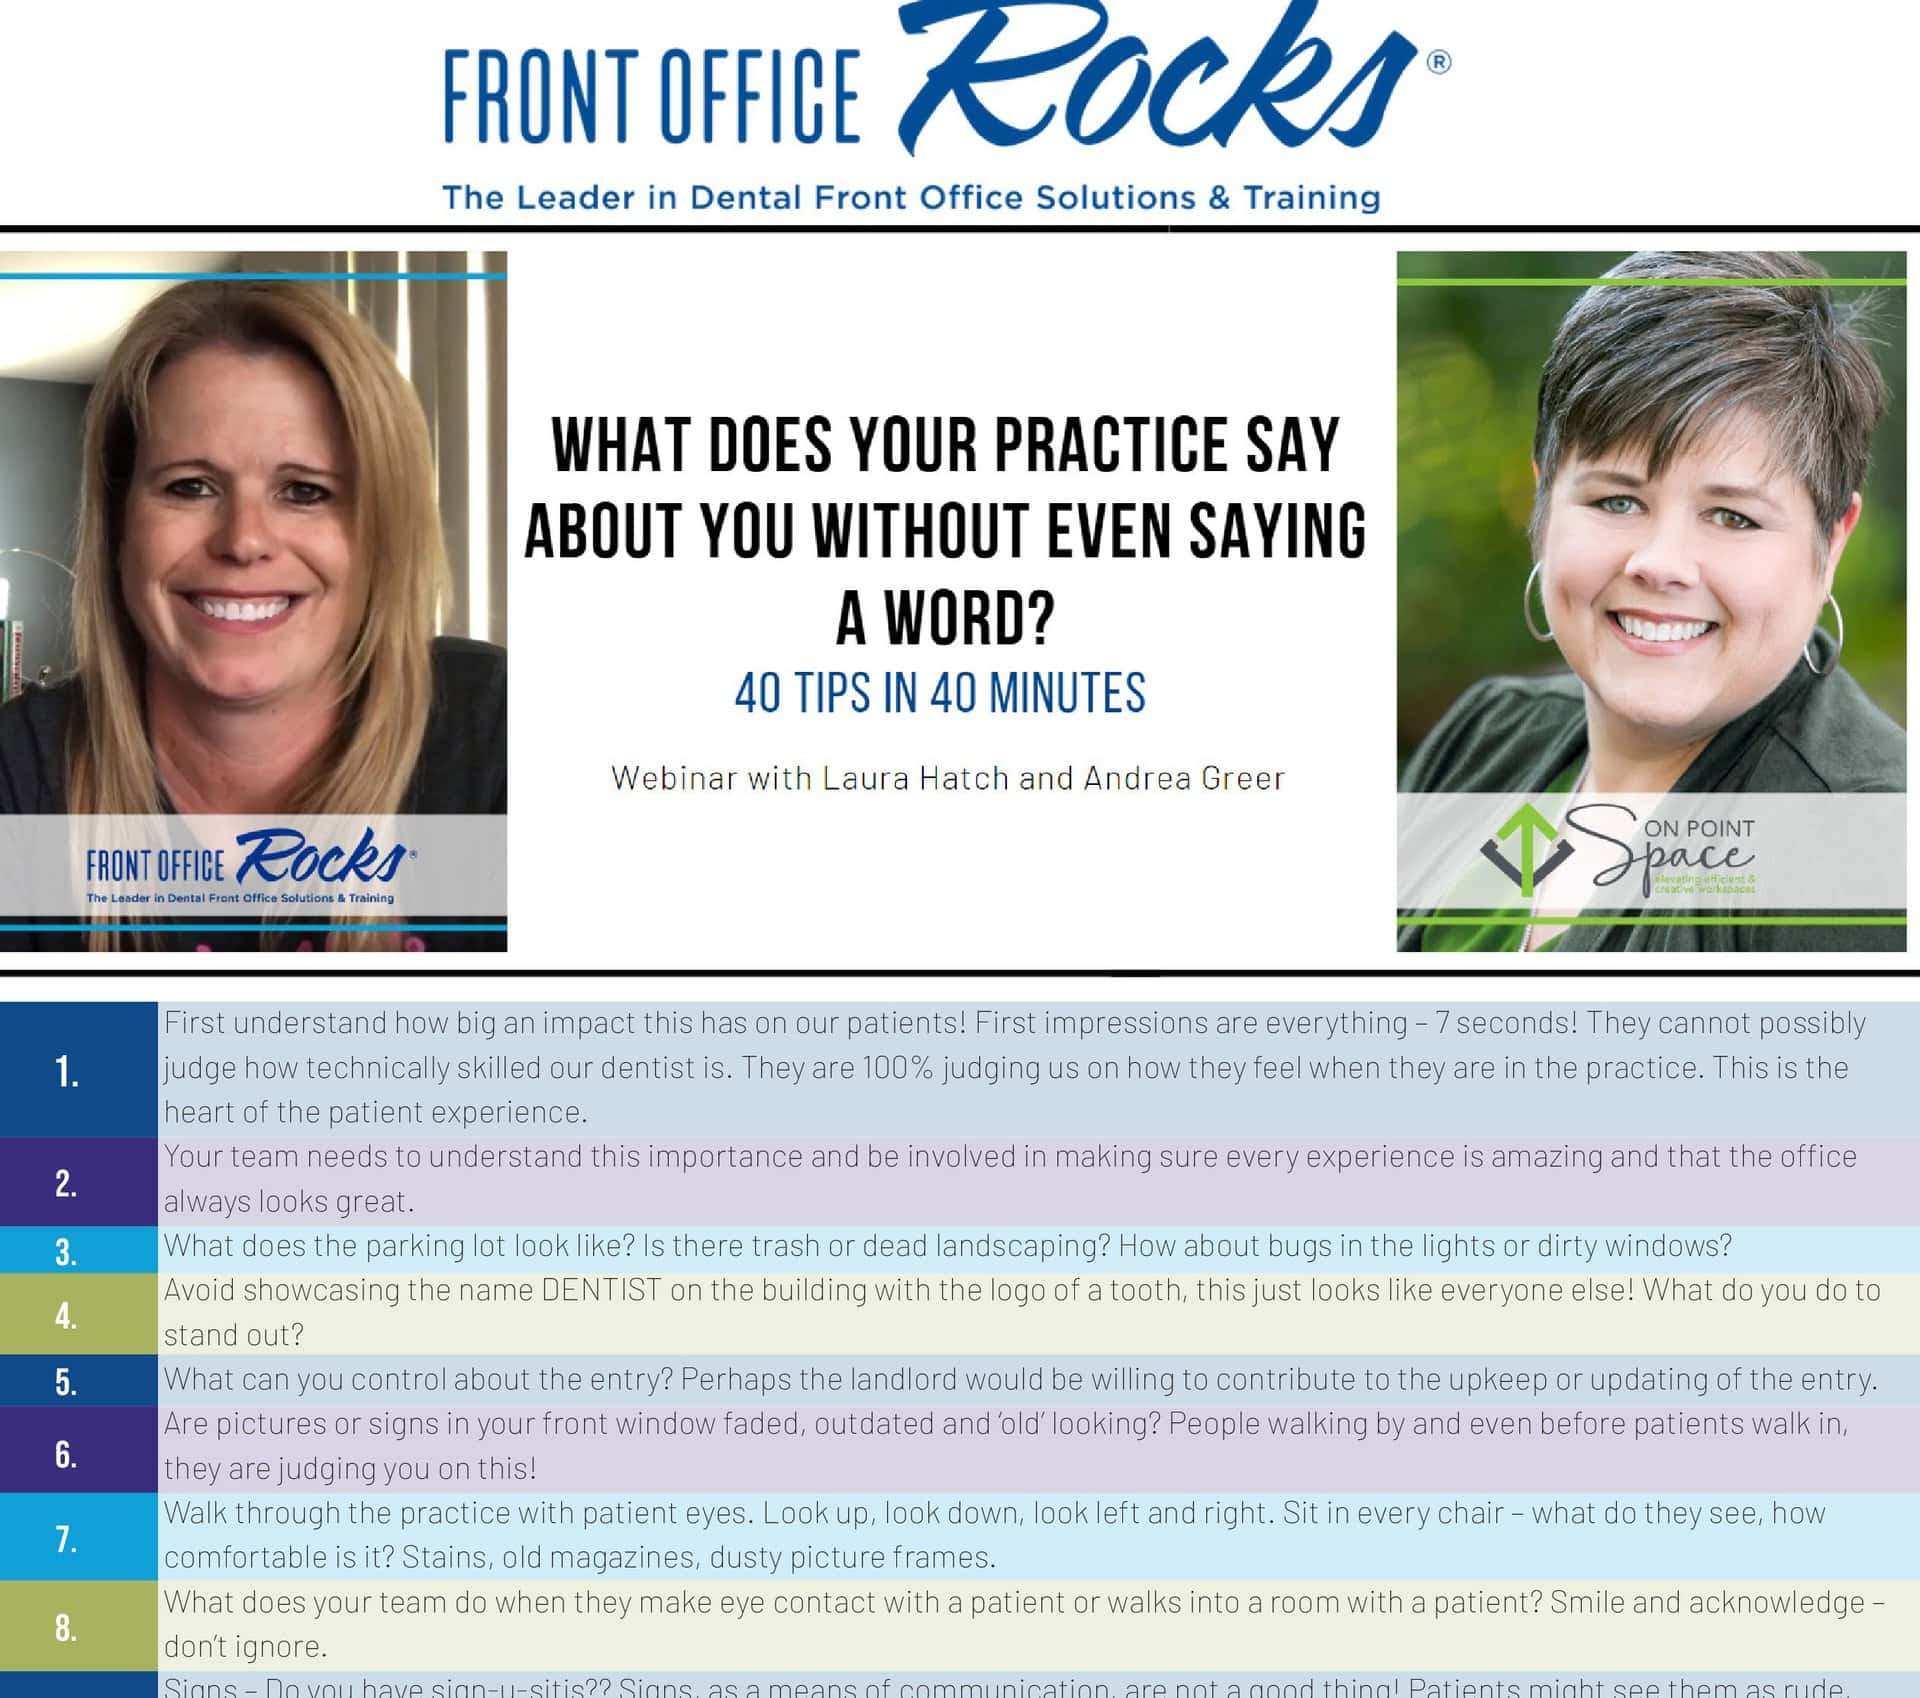 Webinar checklist 40 tips what does your practice say to you without even saaying a word